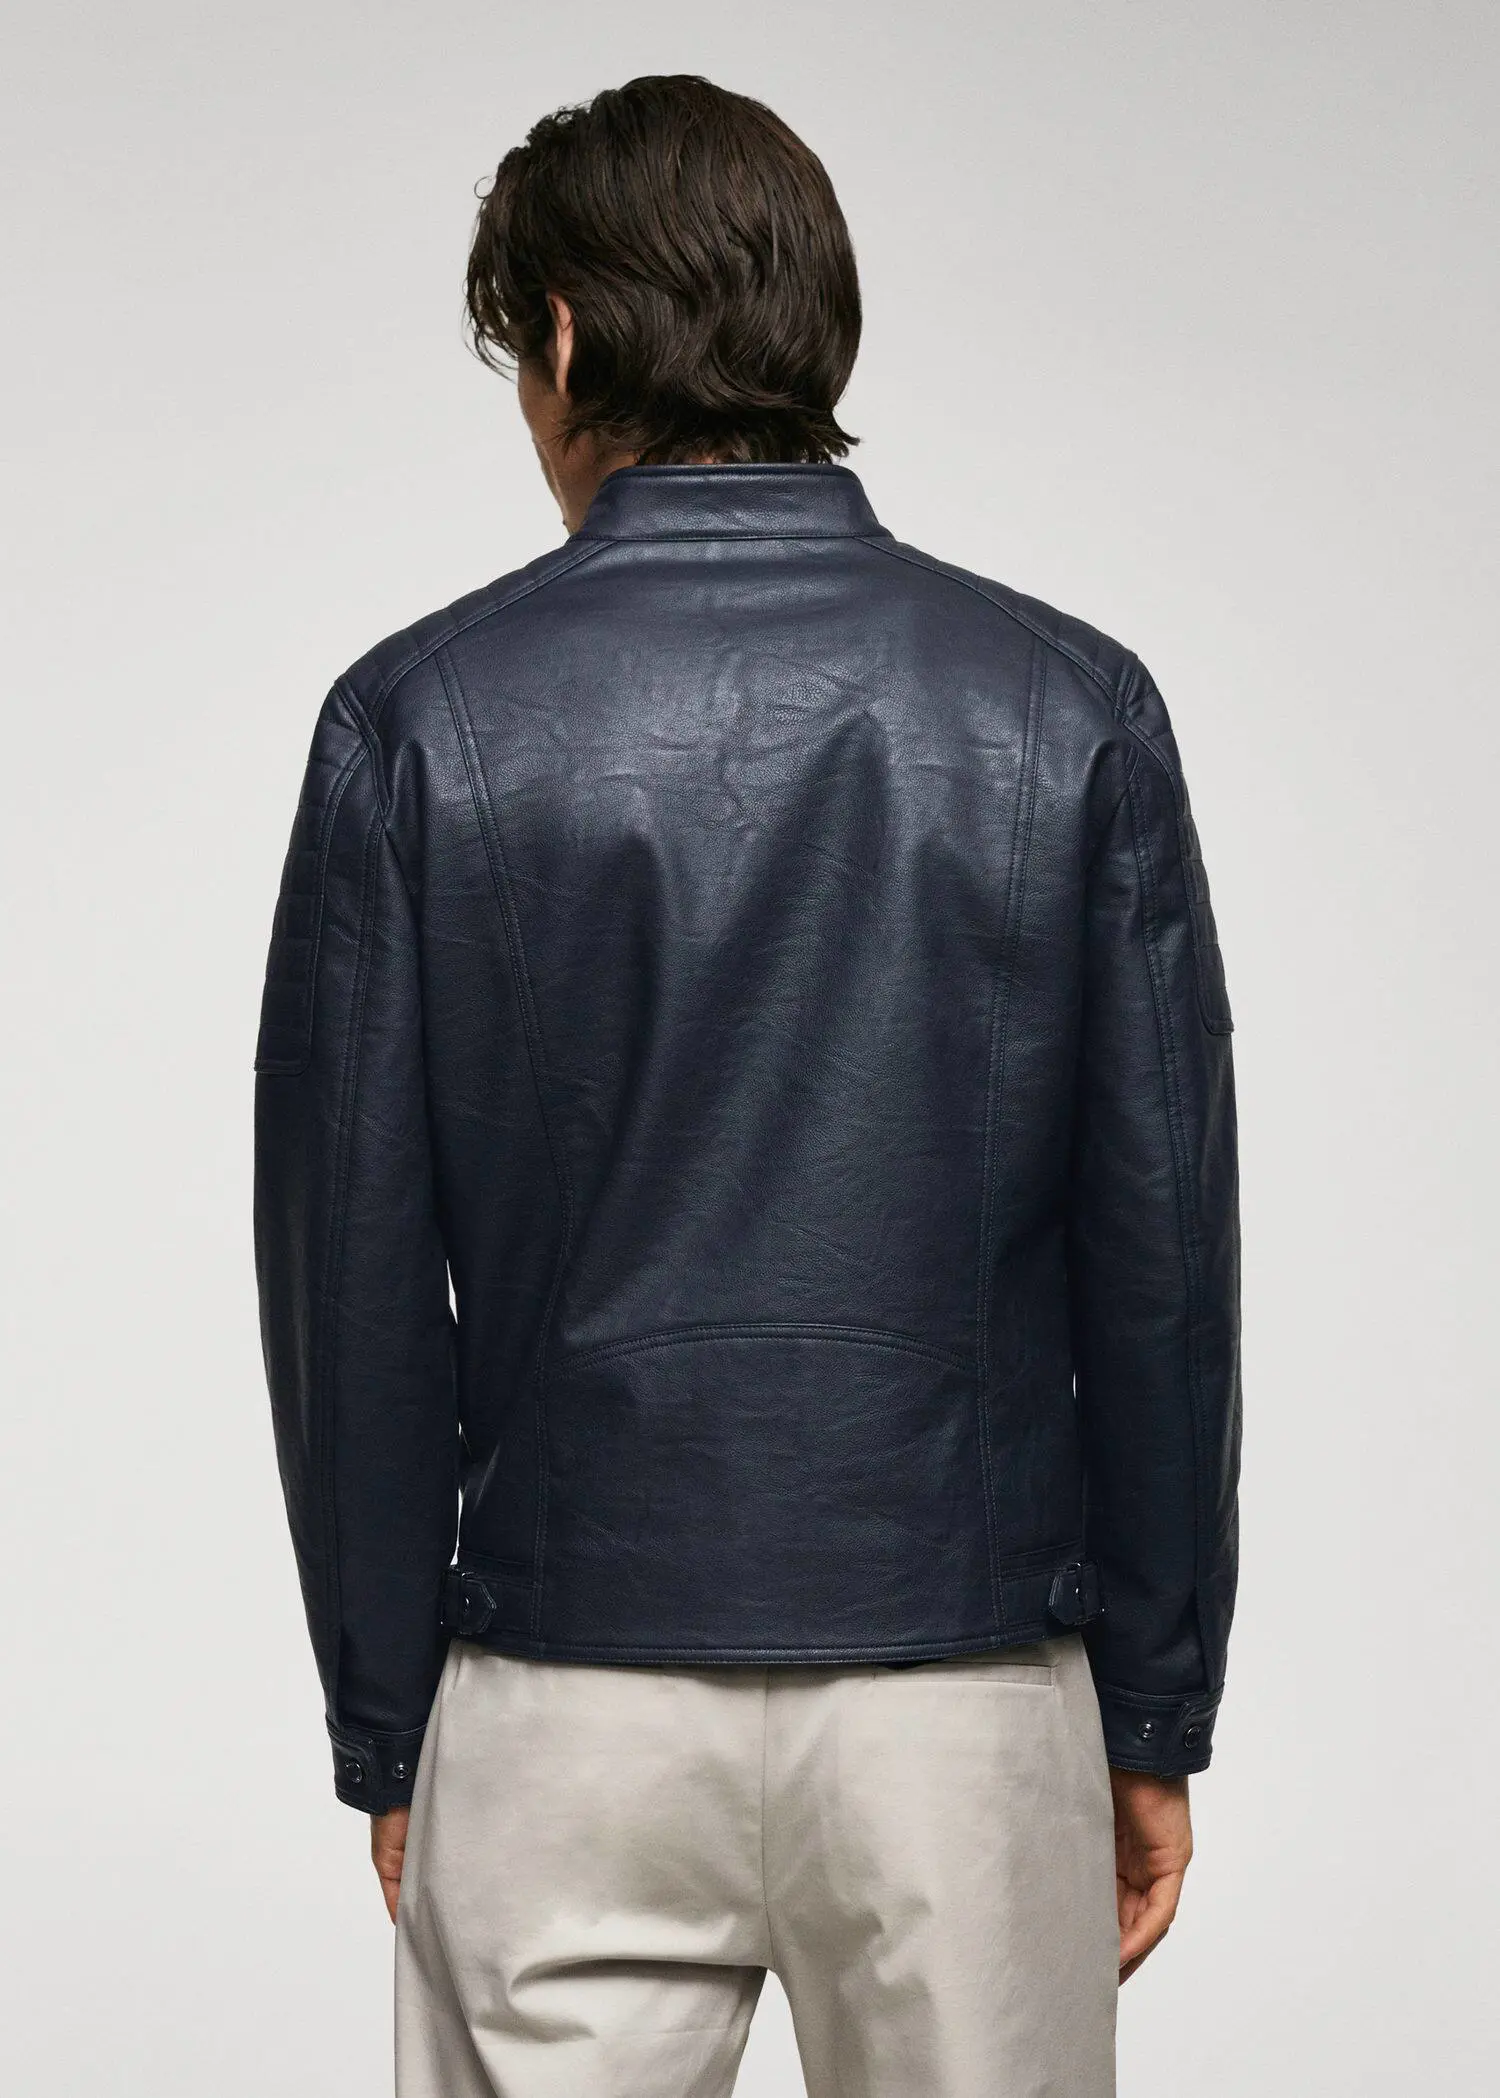 Mango Nappa leather-effect jacket. a man wearing a black leather jacket standing up. 